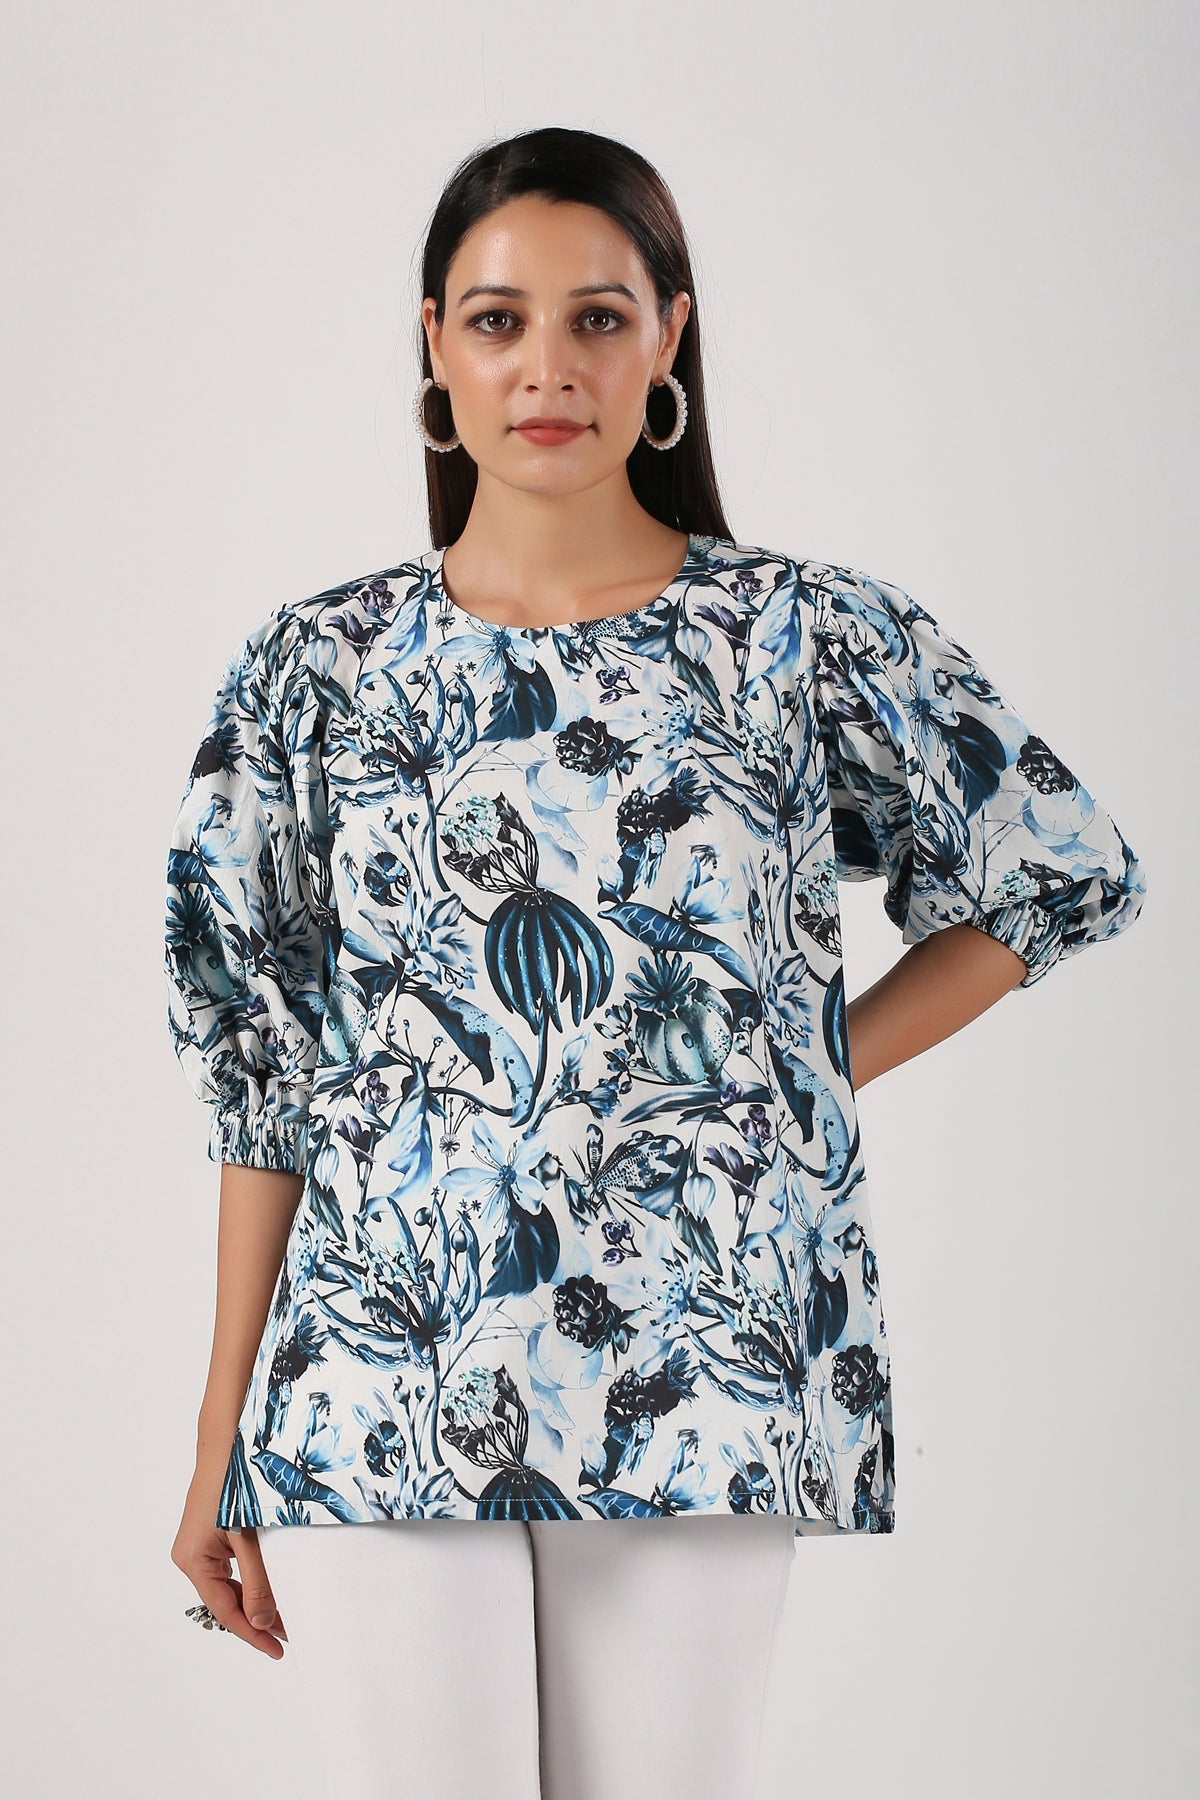 Multicolor Peplum Top at Kamakhyaa by MOH-The Eternal Dhaga. This item is Casual Wear, Cotton, Moh-The eternal Dhaga, Multicolor, Natural, Peplum Tops, Prints, Regular Fit, Womenswear